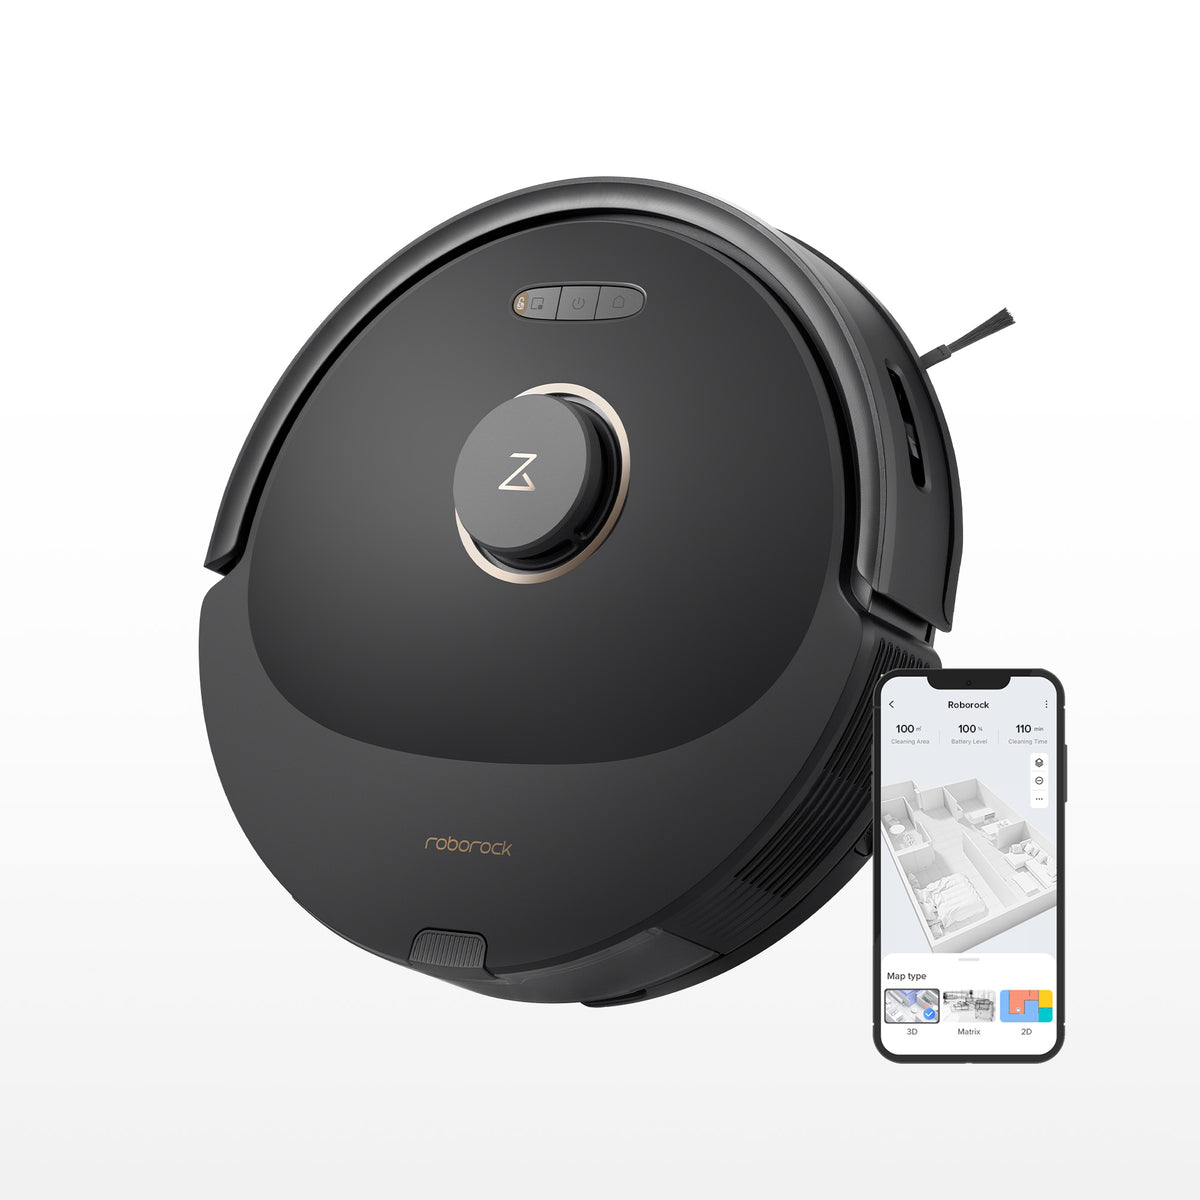  roborock Q7 Max Robot Vacuum and Mop Cleaner, 4200Pa Strong  Suction, Lidar Navigation, Multi-Level Mapping, No-Go&No-Mop Zones, 180mins  Runtime, Works with Alexa, Perfect for Pet Hair(Black)